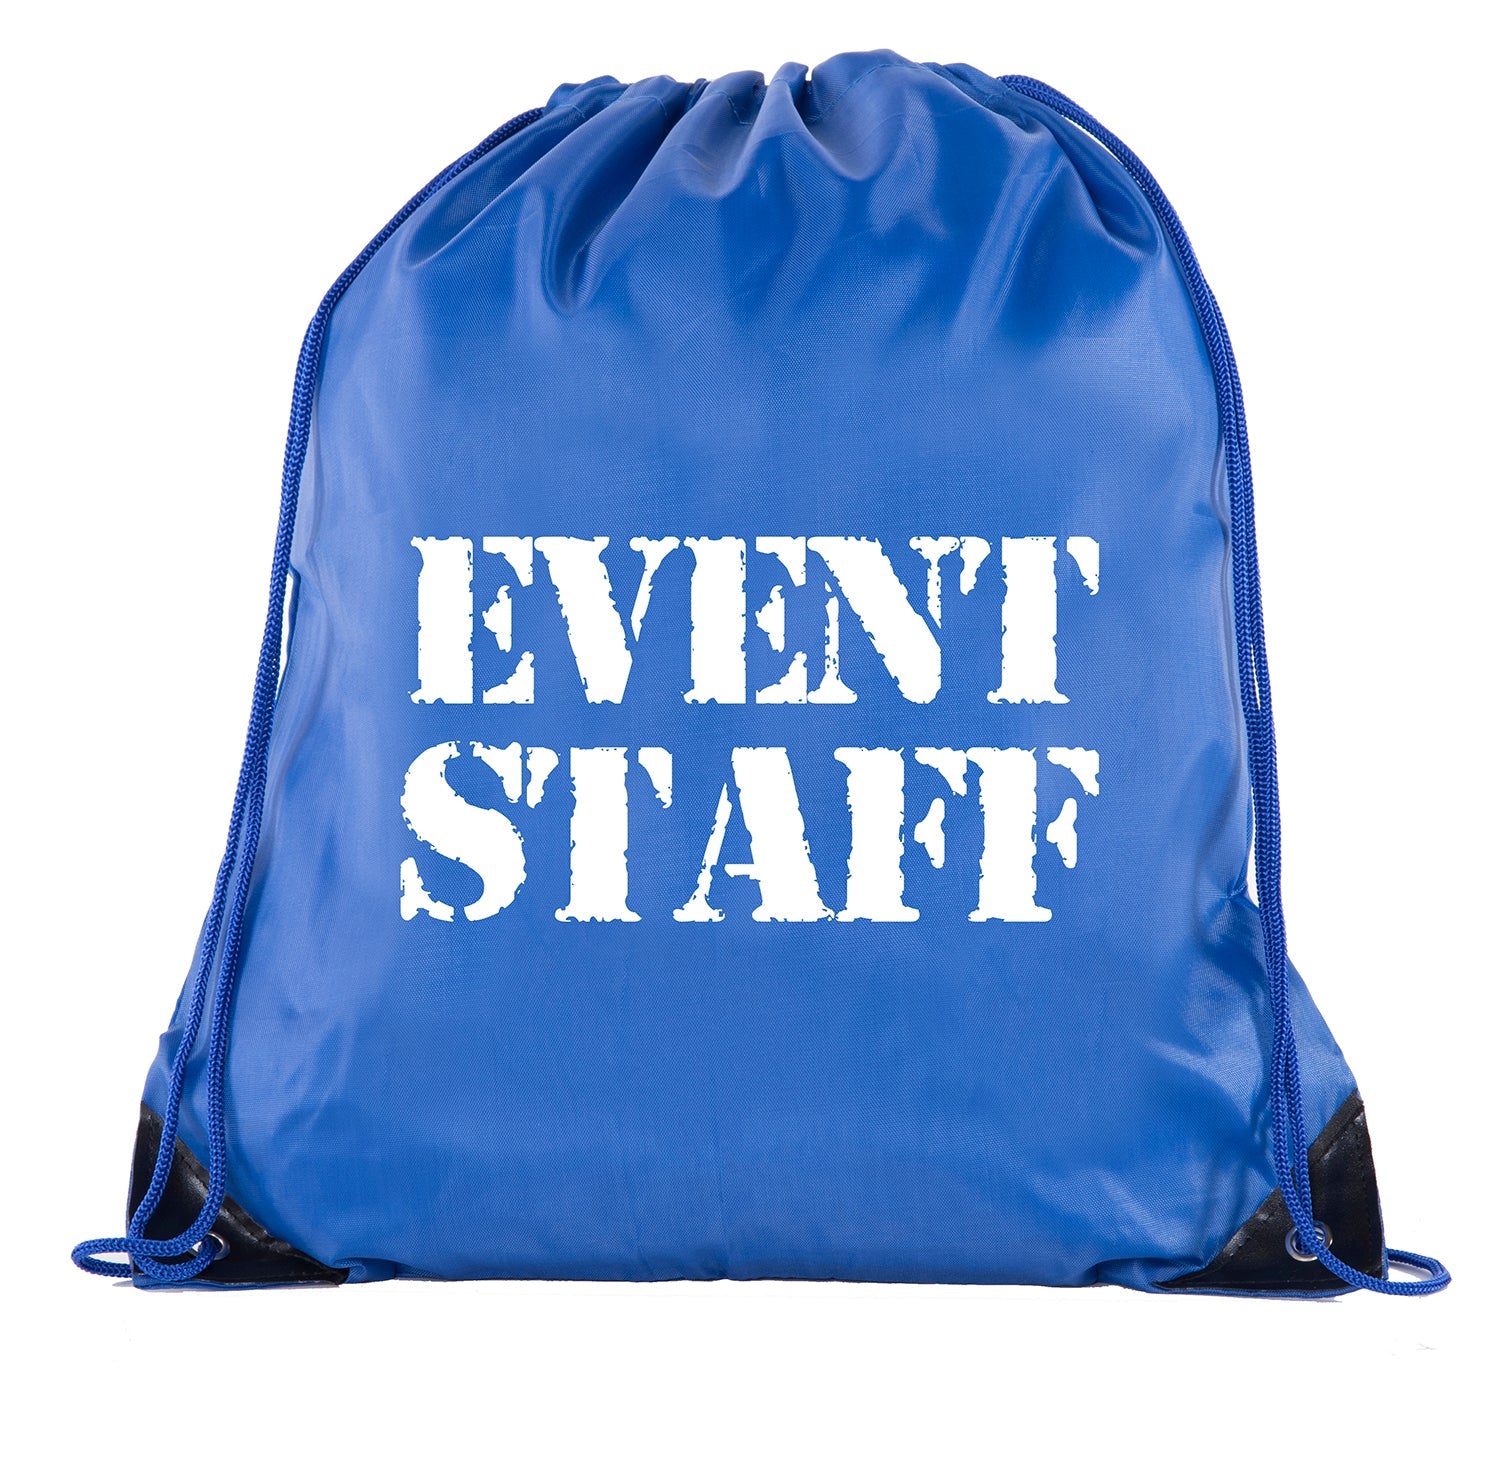 Event Staff - Rough Text - Polyester Drawstring Bag - Mato & Hash